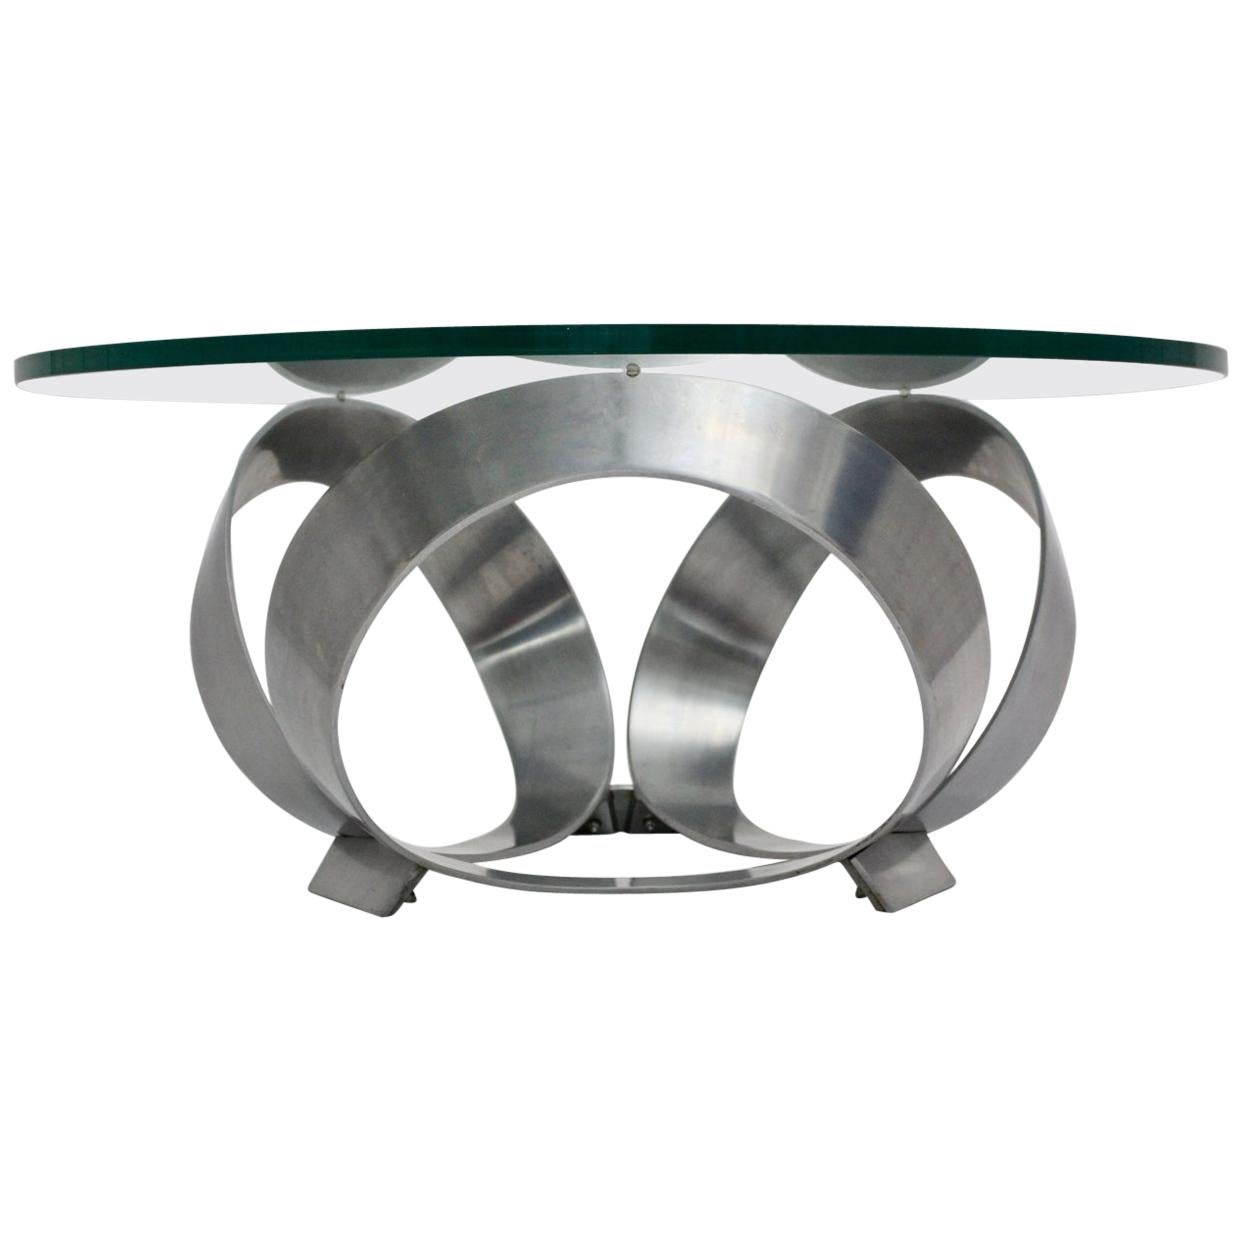 Mid-Century Modern Ring Coffee Table by Knut Hesterberg 1960s Germany